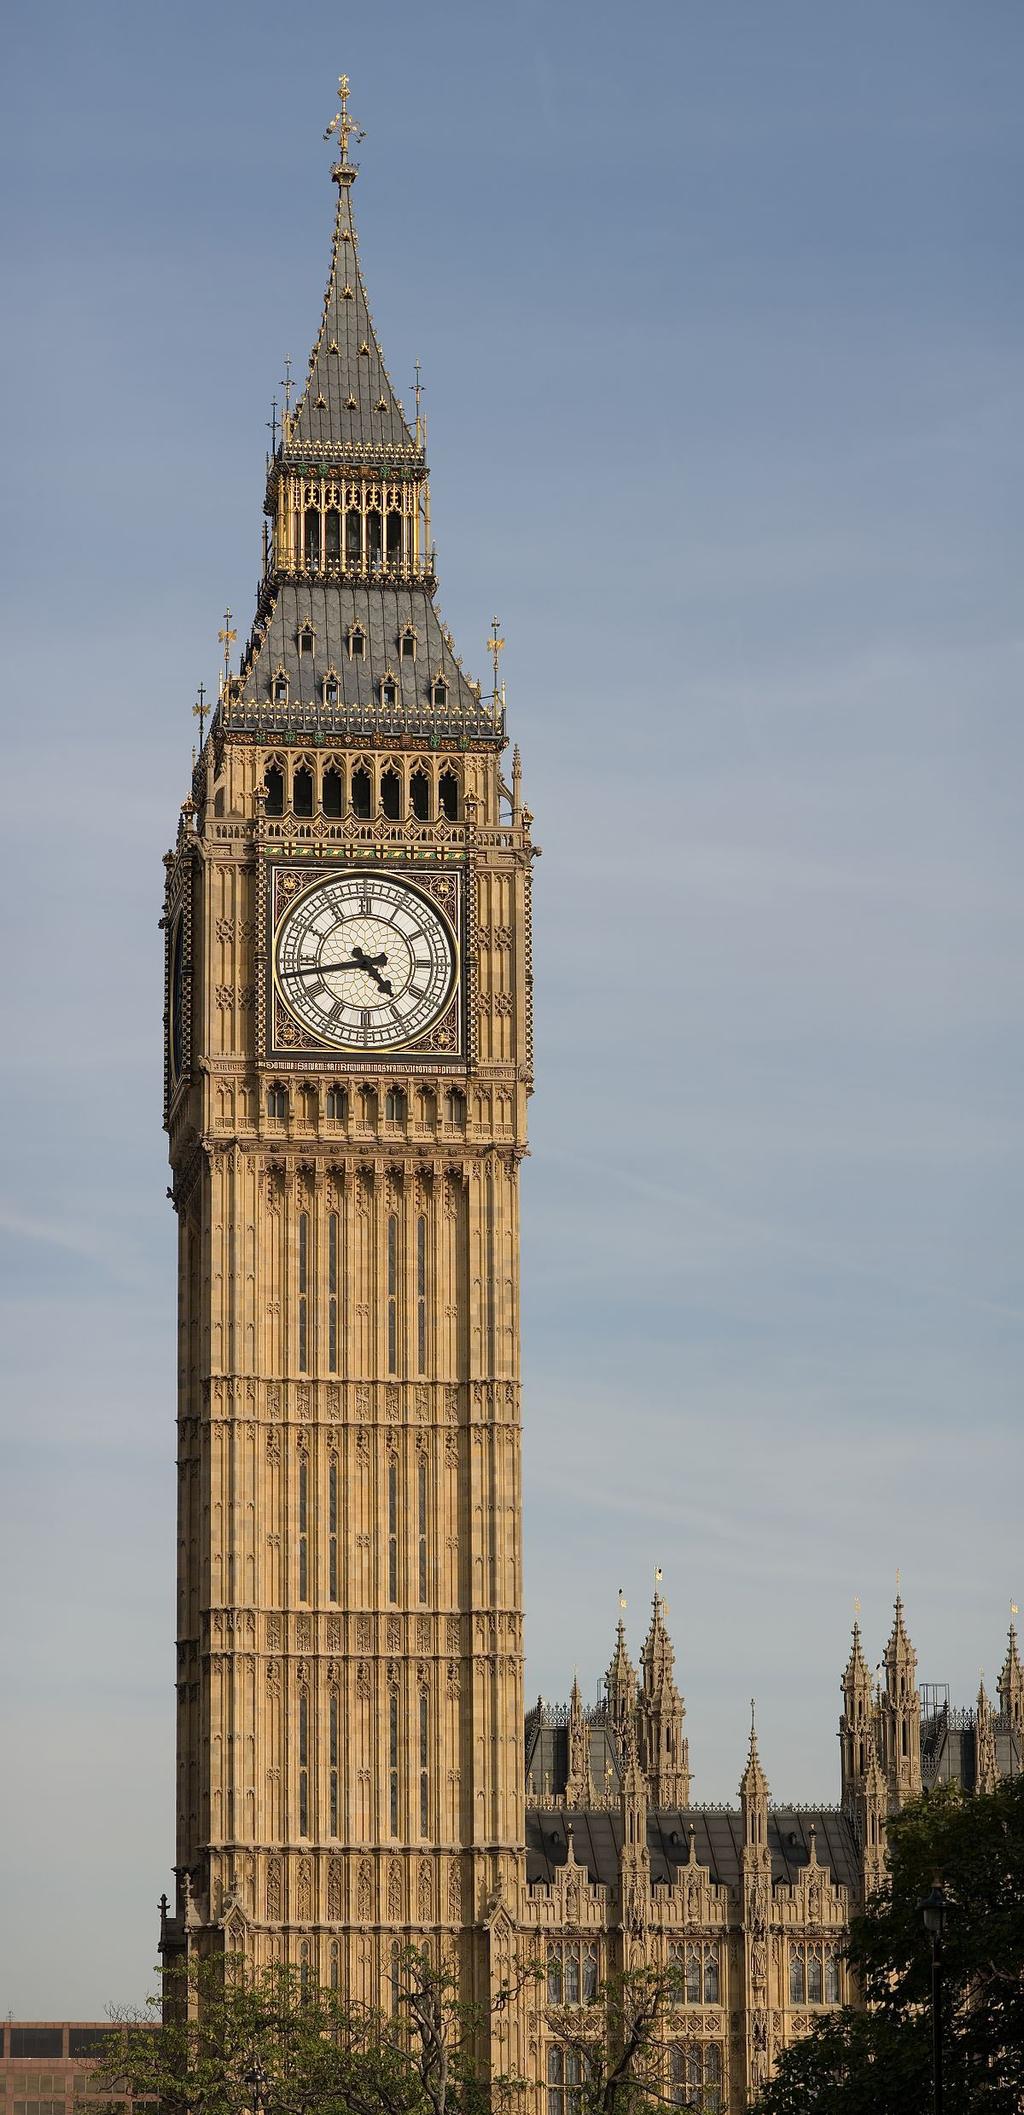 Big Ben Big Ben is the nickname for the Great Bell of the clock at the north end of the Palace of Westminster in London and is usually extended to refer to both the clock and the clock